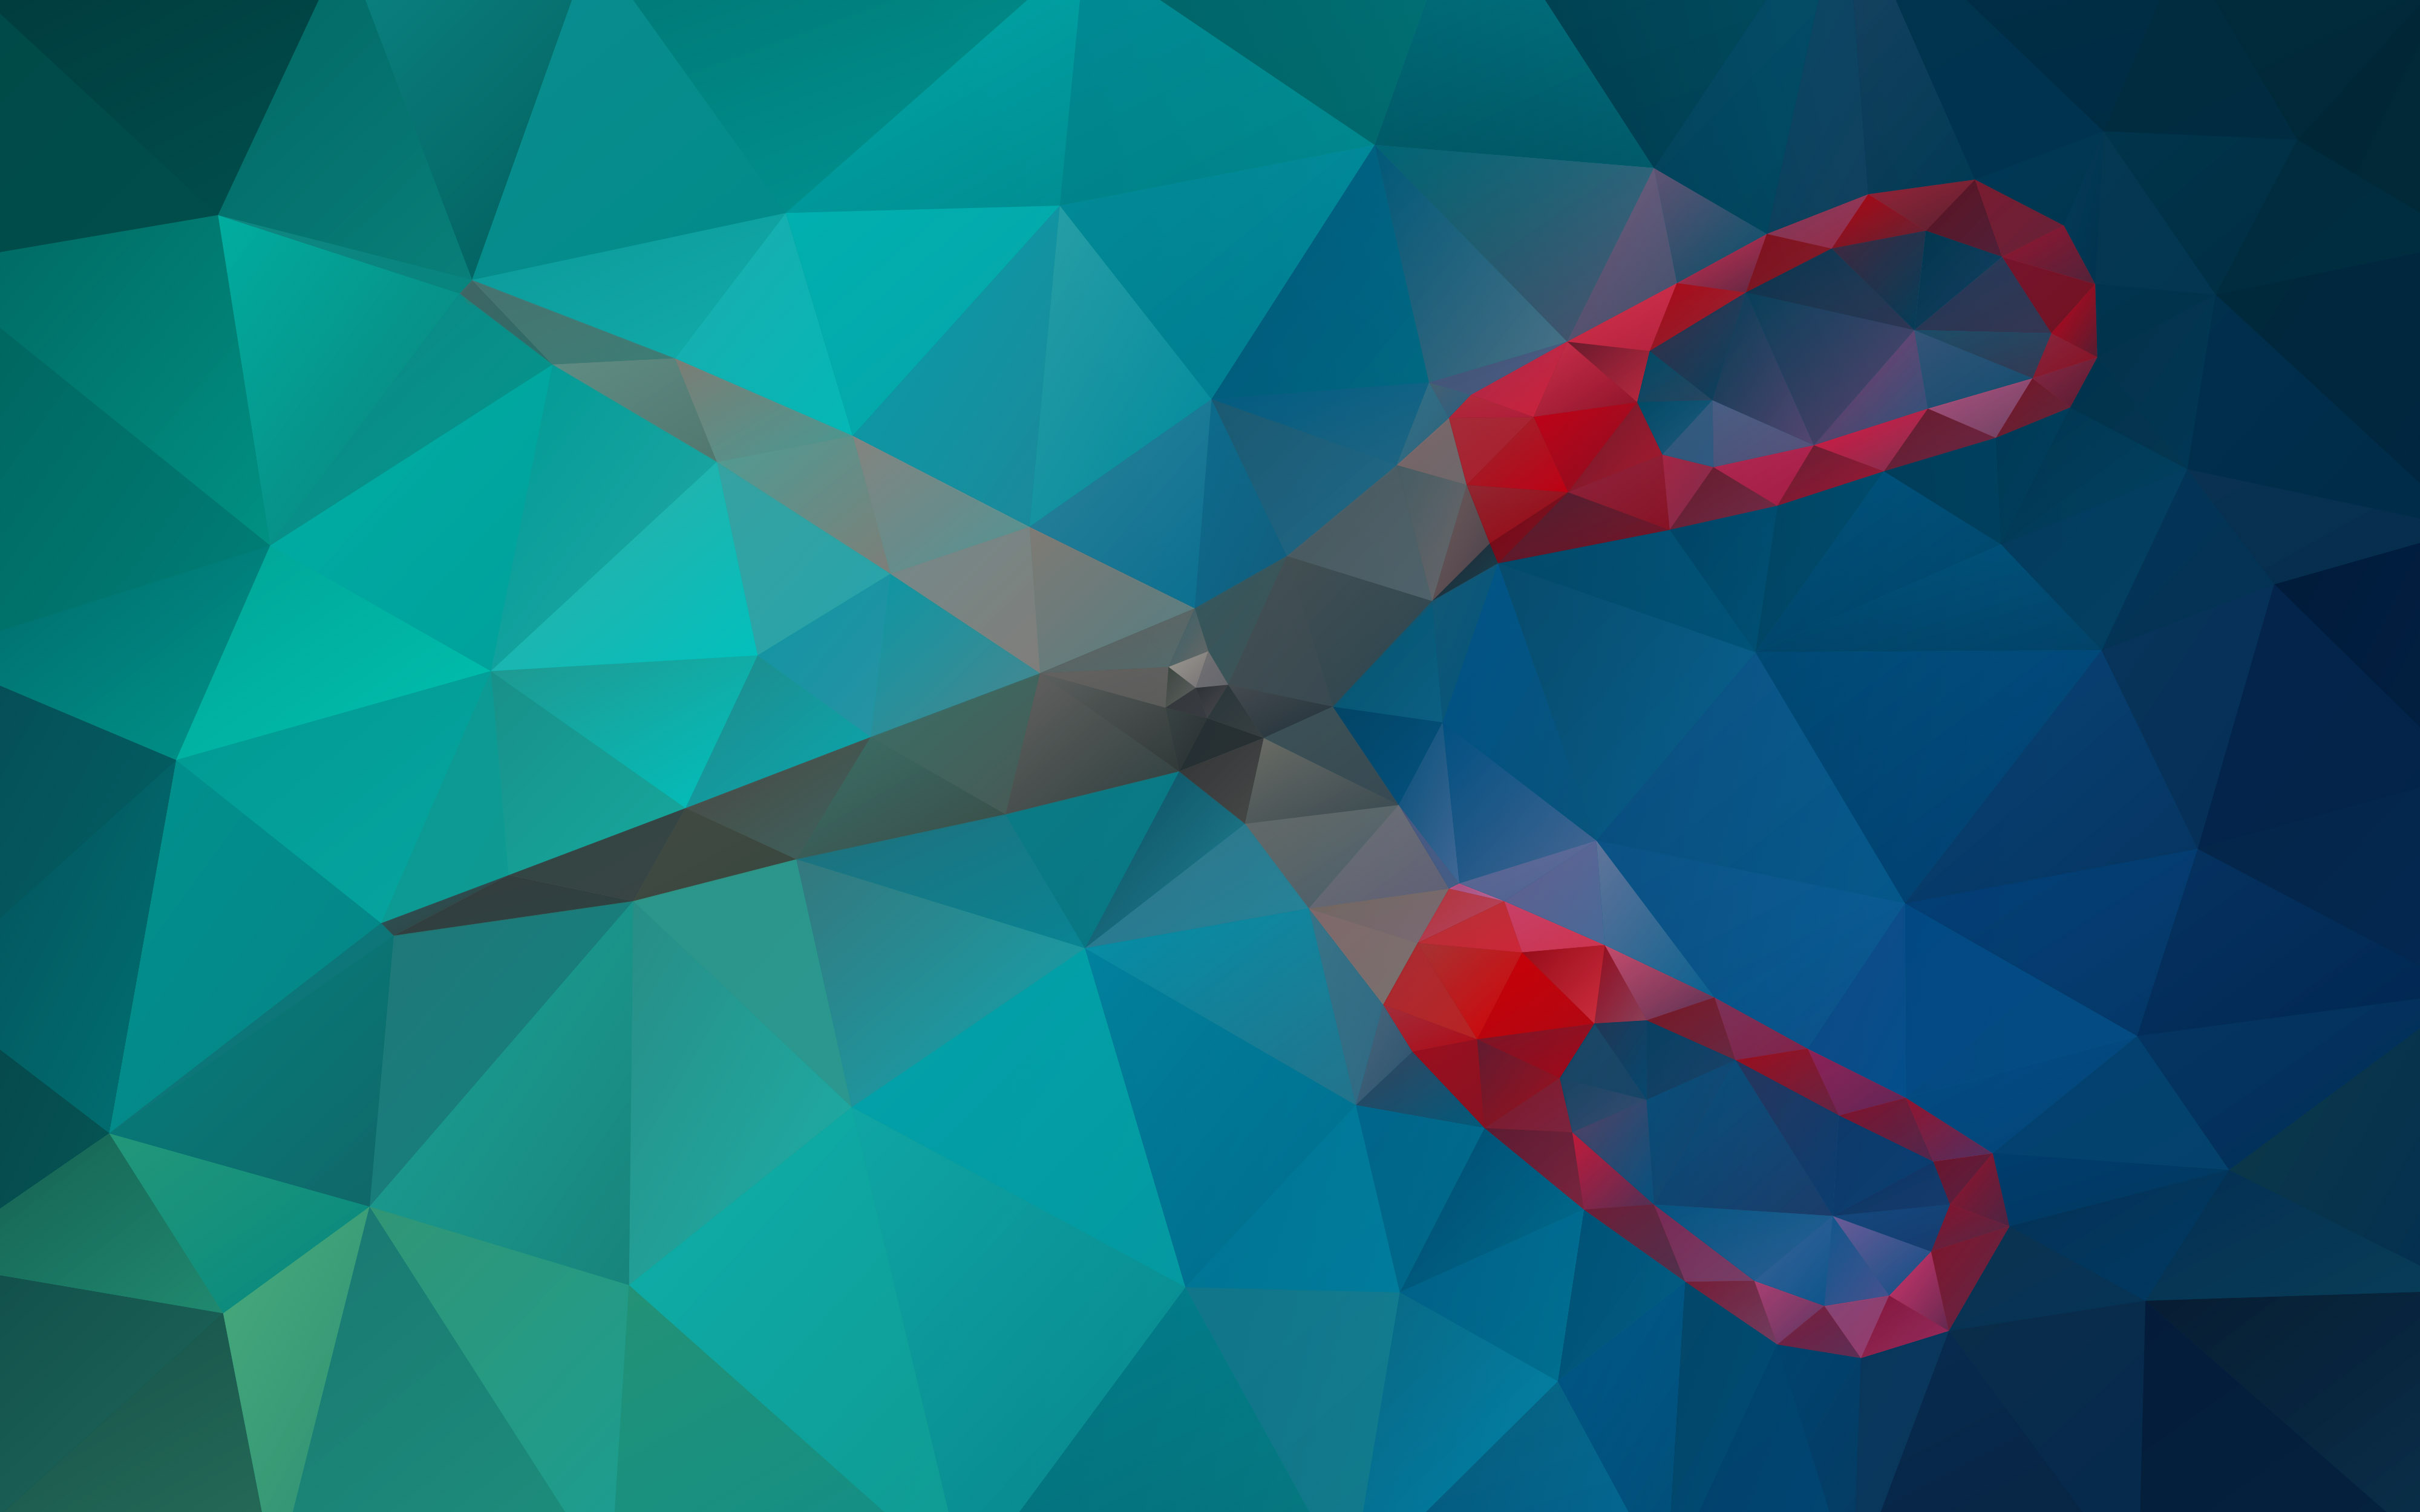 Red scissors on a blue and green background